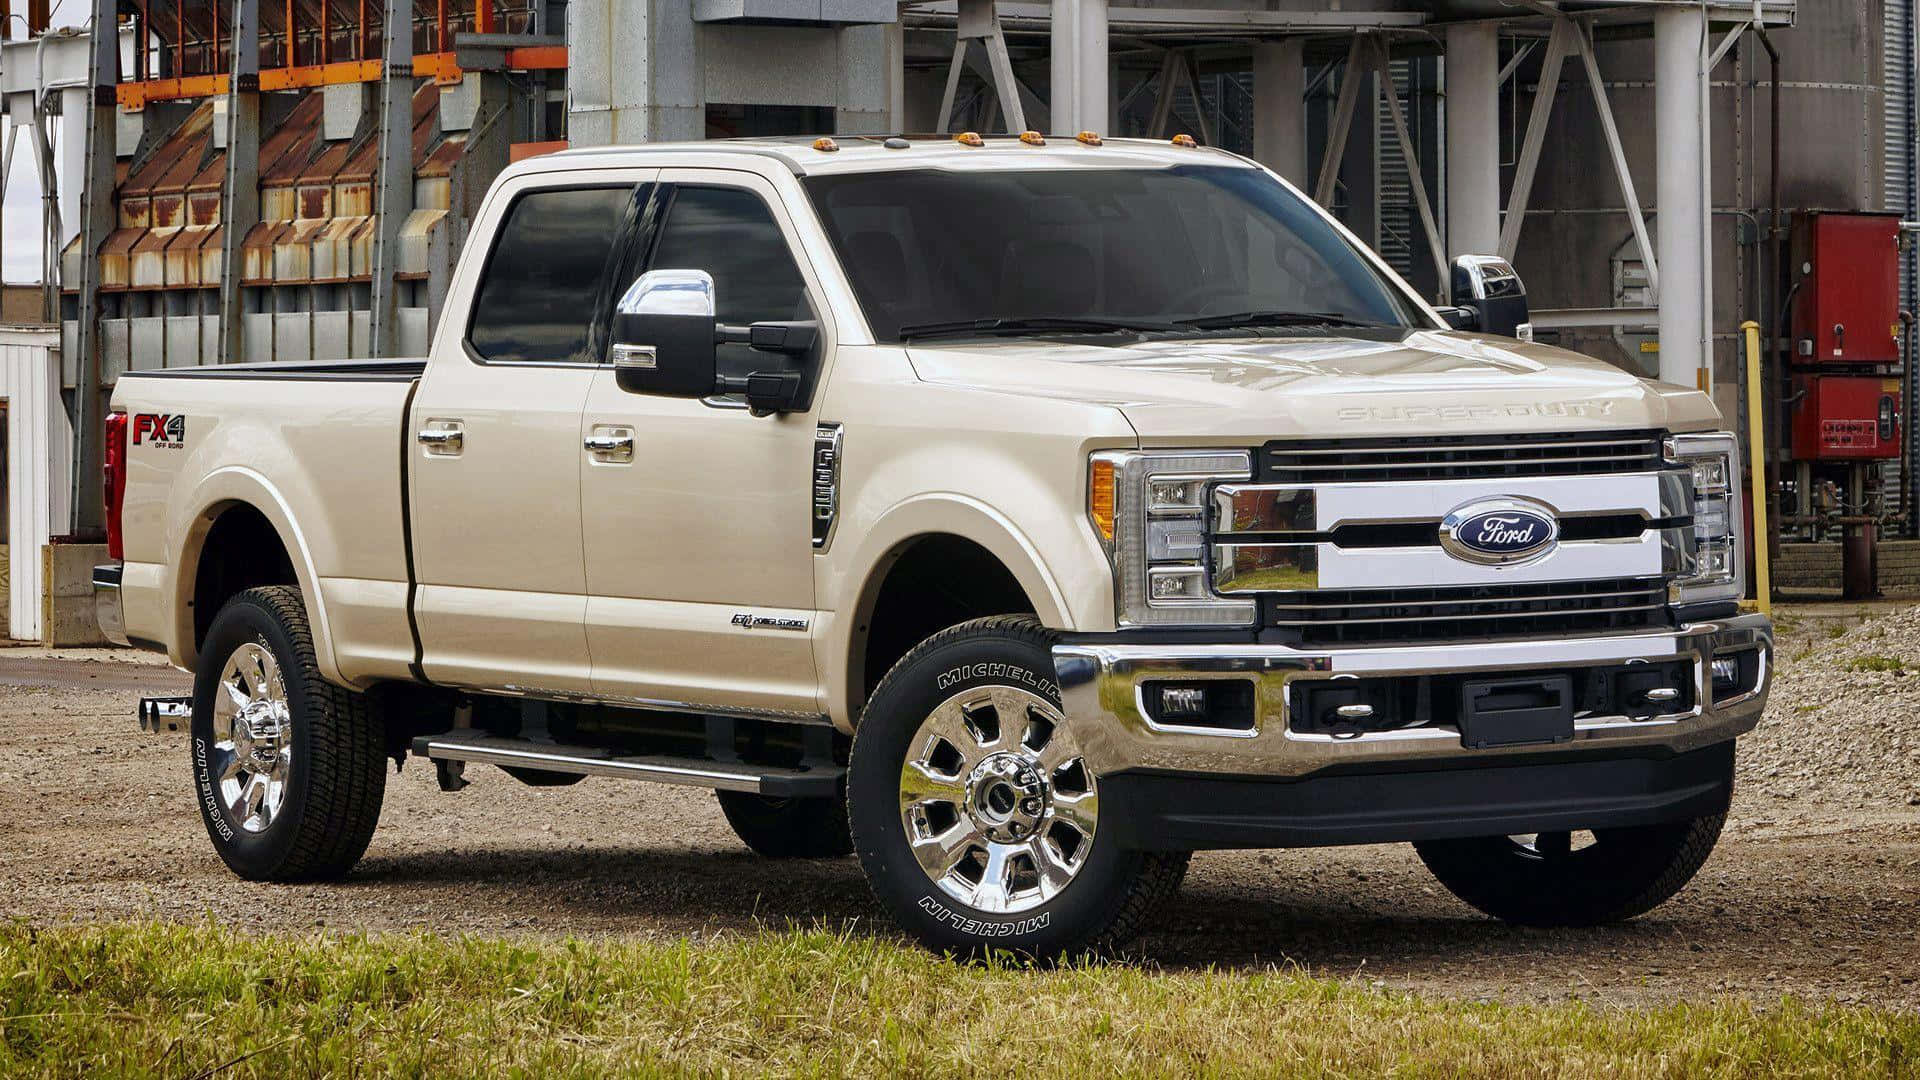 "Power and Performance: See How Ford's Powerstroke Engine Can Transform Your Vehicle" Wallpaper